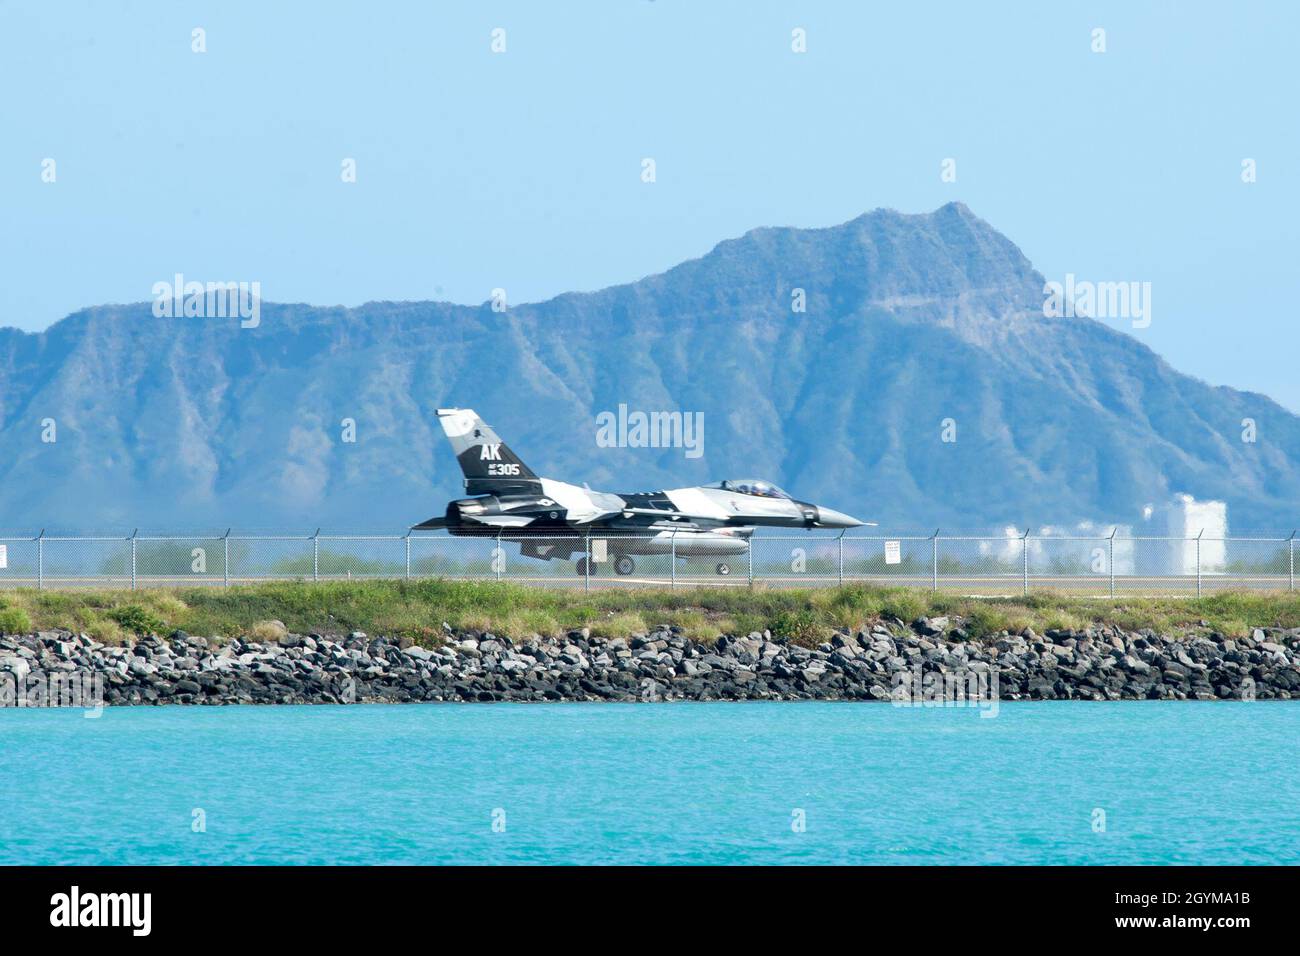 An F-16 Fighting Falcon from the 18th Aggressor Squadron taxis down the Honolulu Airport Runway Jan. 29, 2020. The aircraft practiced combat tactics alongside the world’s most advanced fifth-generation airframes, the F-22 Raptor and F-35A Lightning II. The F-16 is assigned to the 18th Aggressor Squadron in Eielson Air Force Base, Alaska, and its mission is to prepare pilots for victory by simulating combat tactics which are likely to be faced in the event of an air-to-air battle.  (U.S. Air Force photo by Senior Airman John Linzmeier) Stock Photo